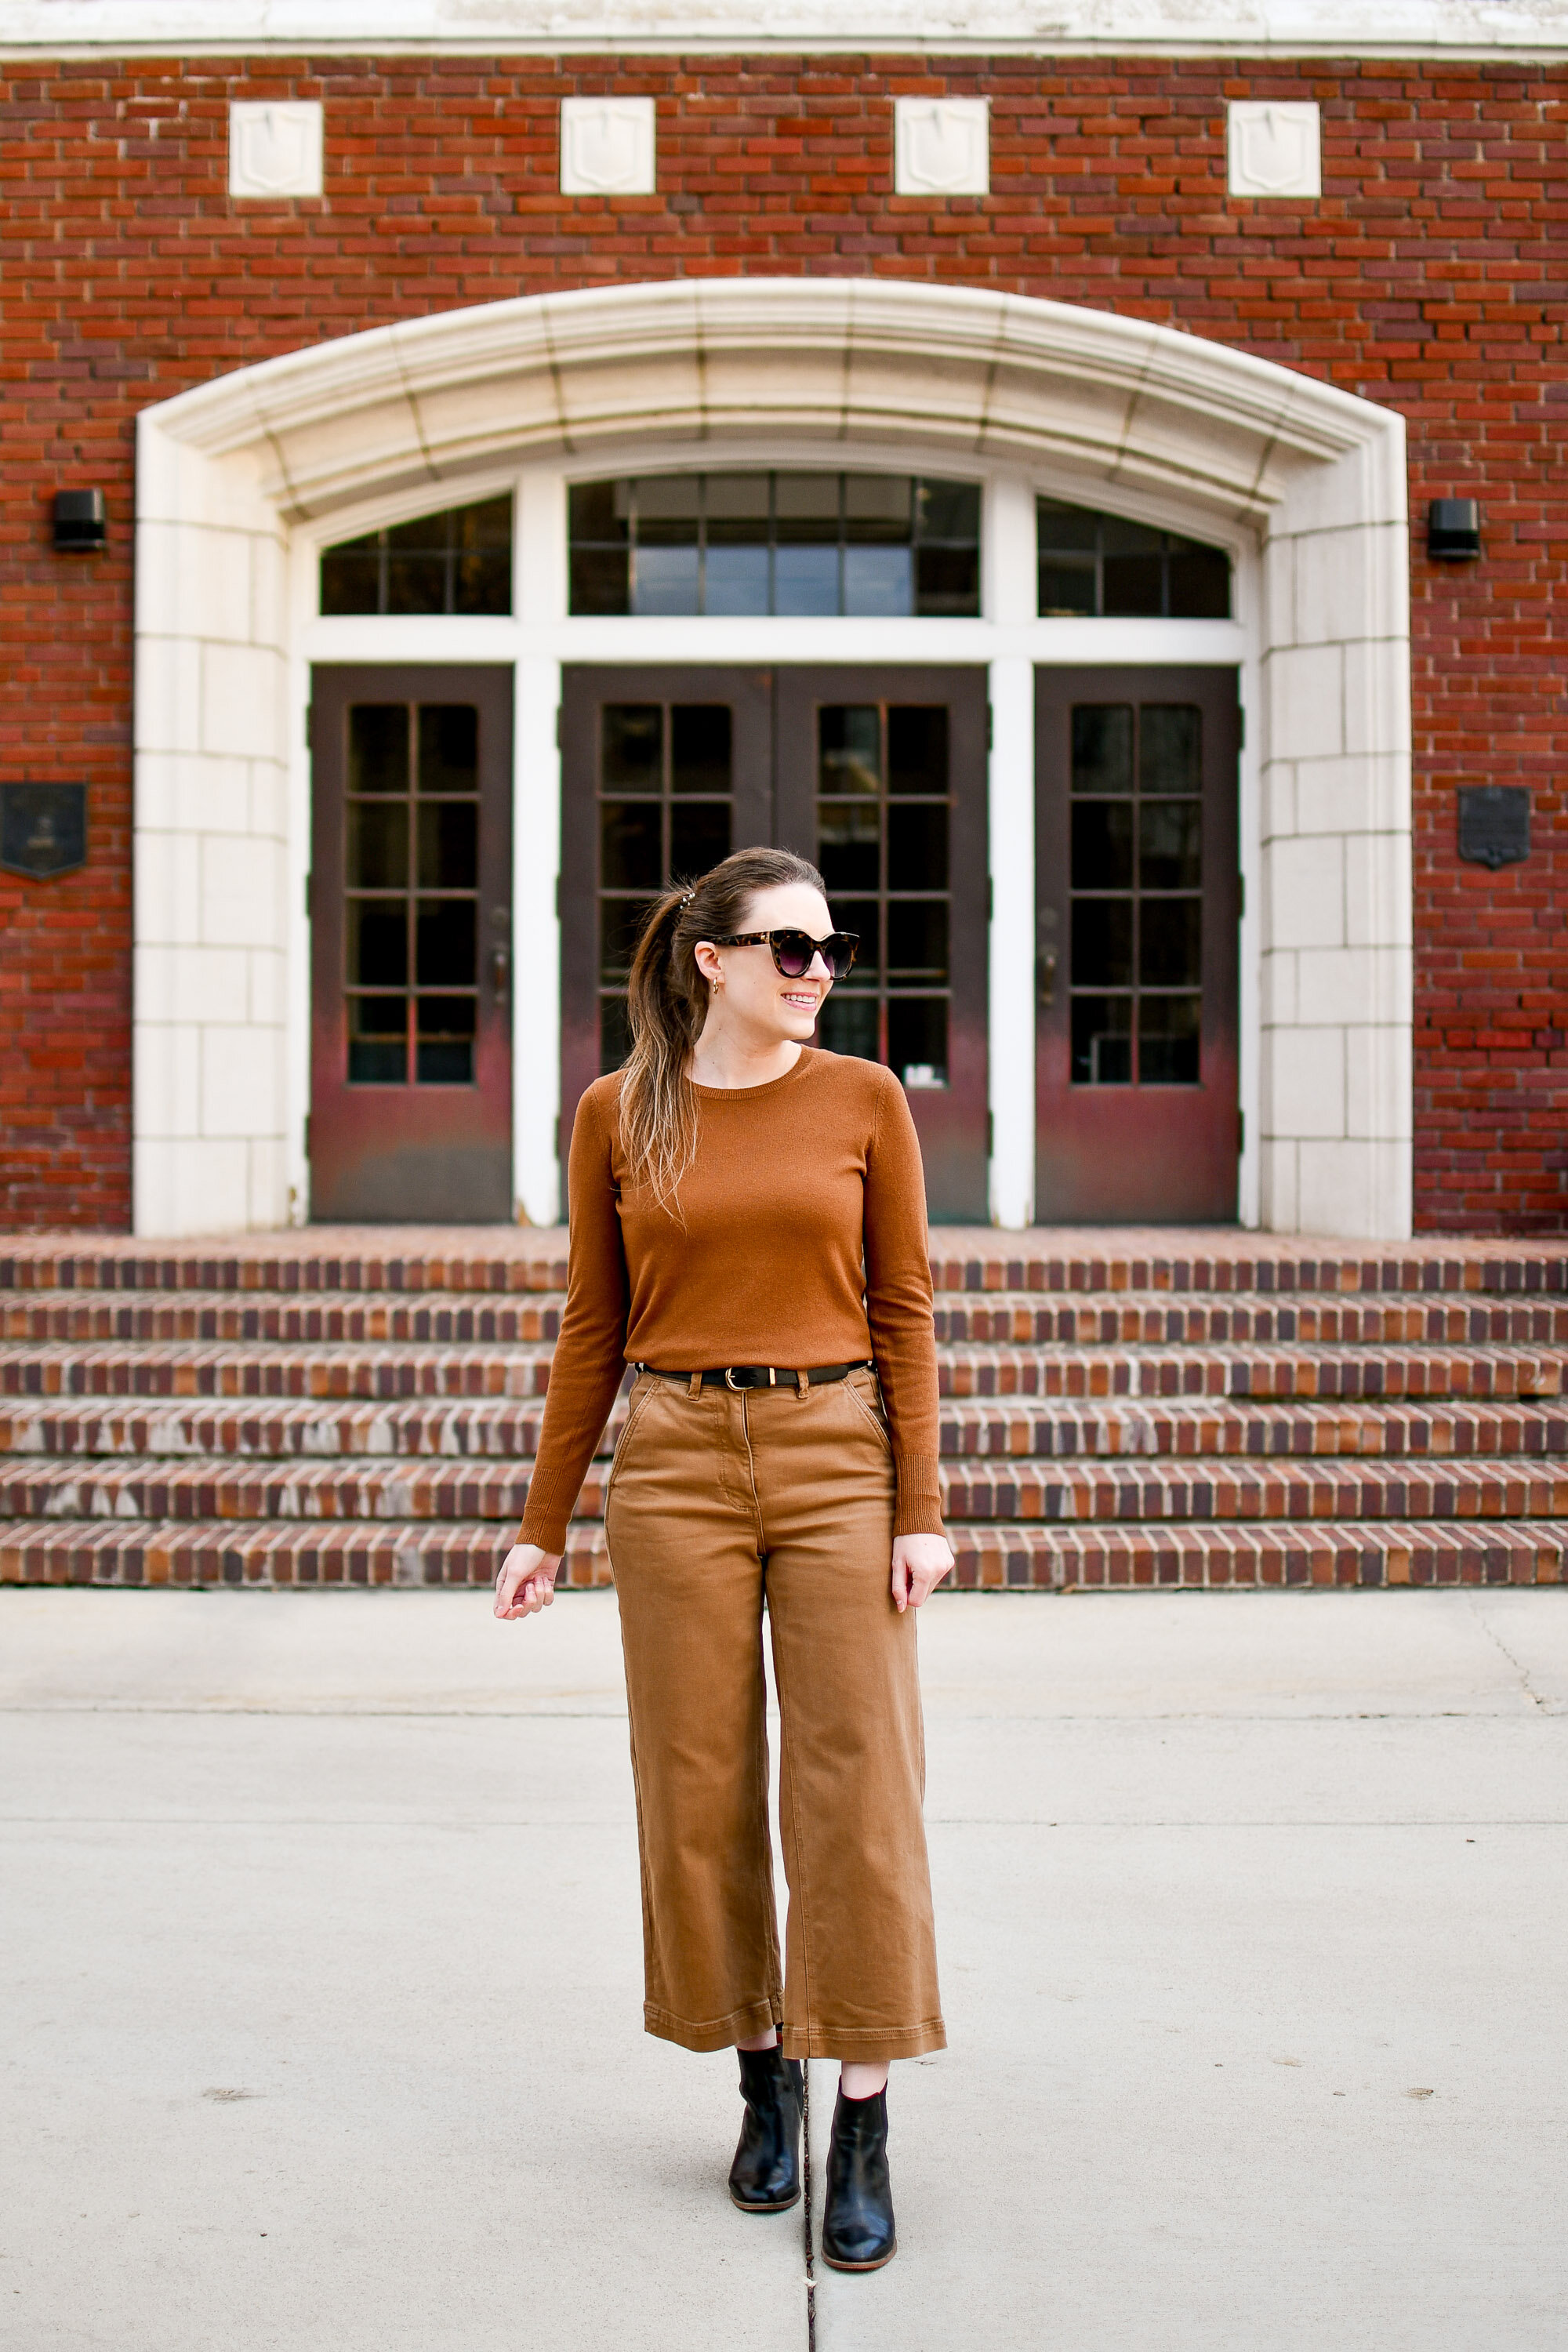 Brown outfit